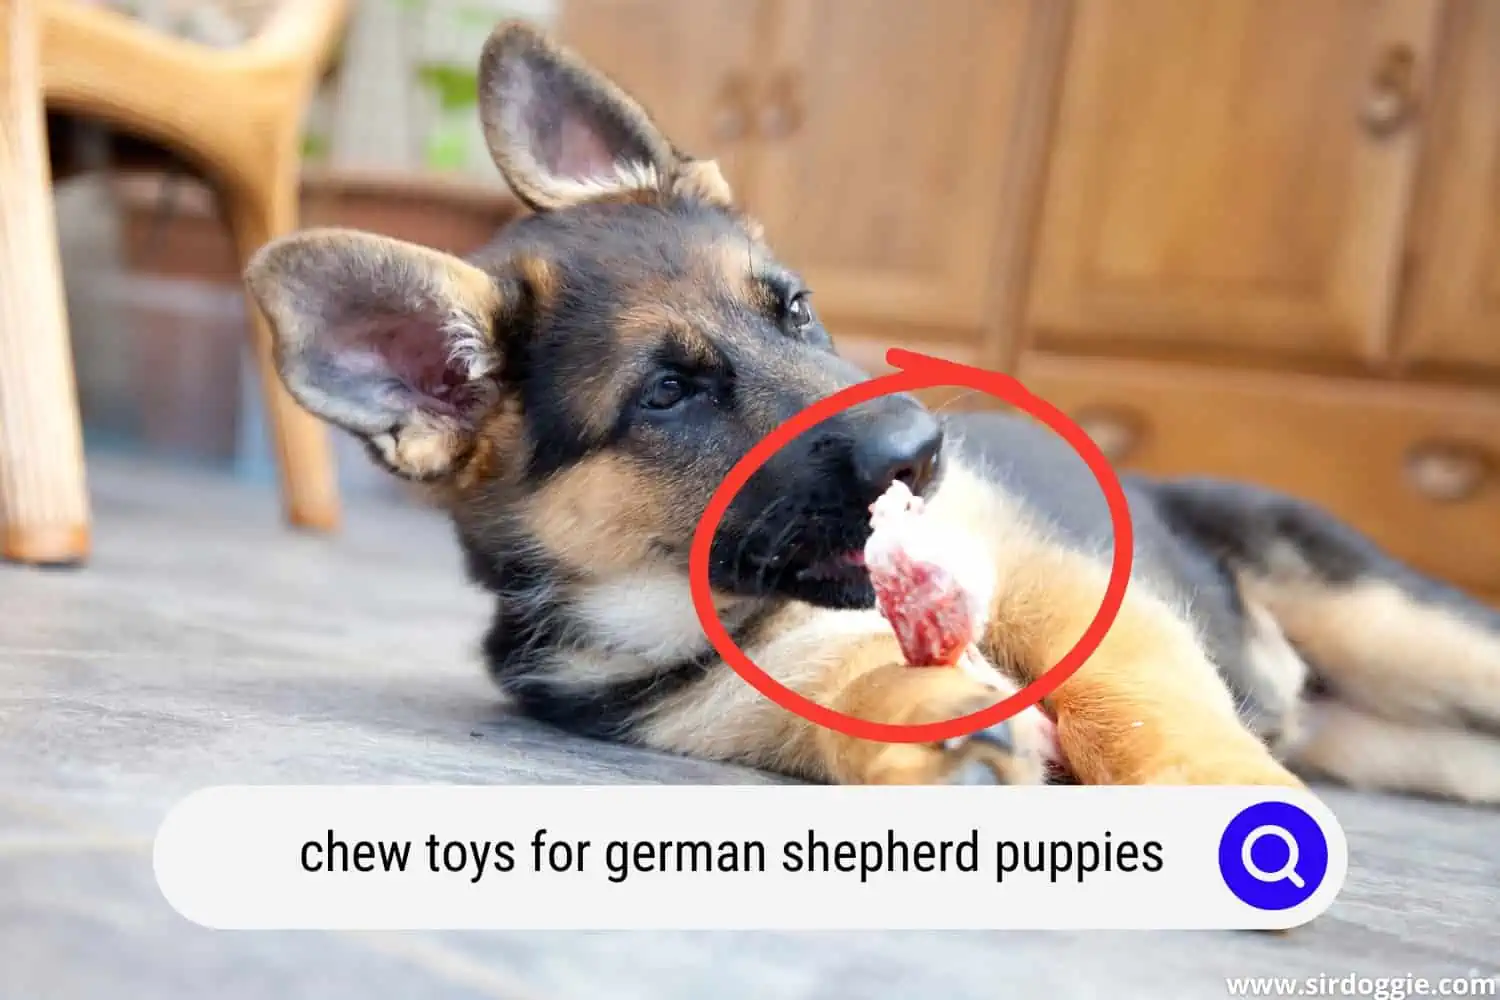 A German Shepherd puppy chewing a toy